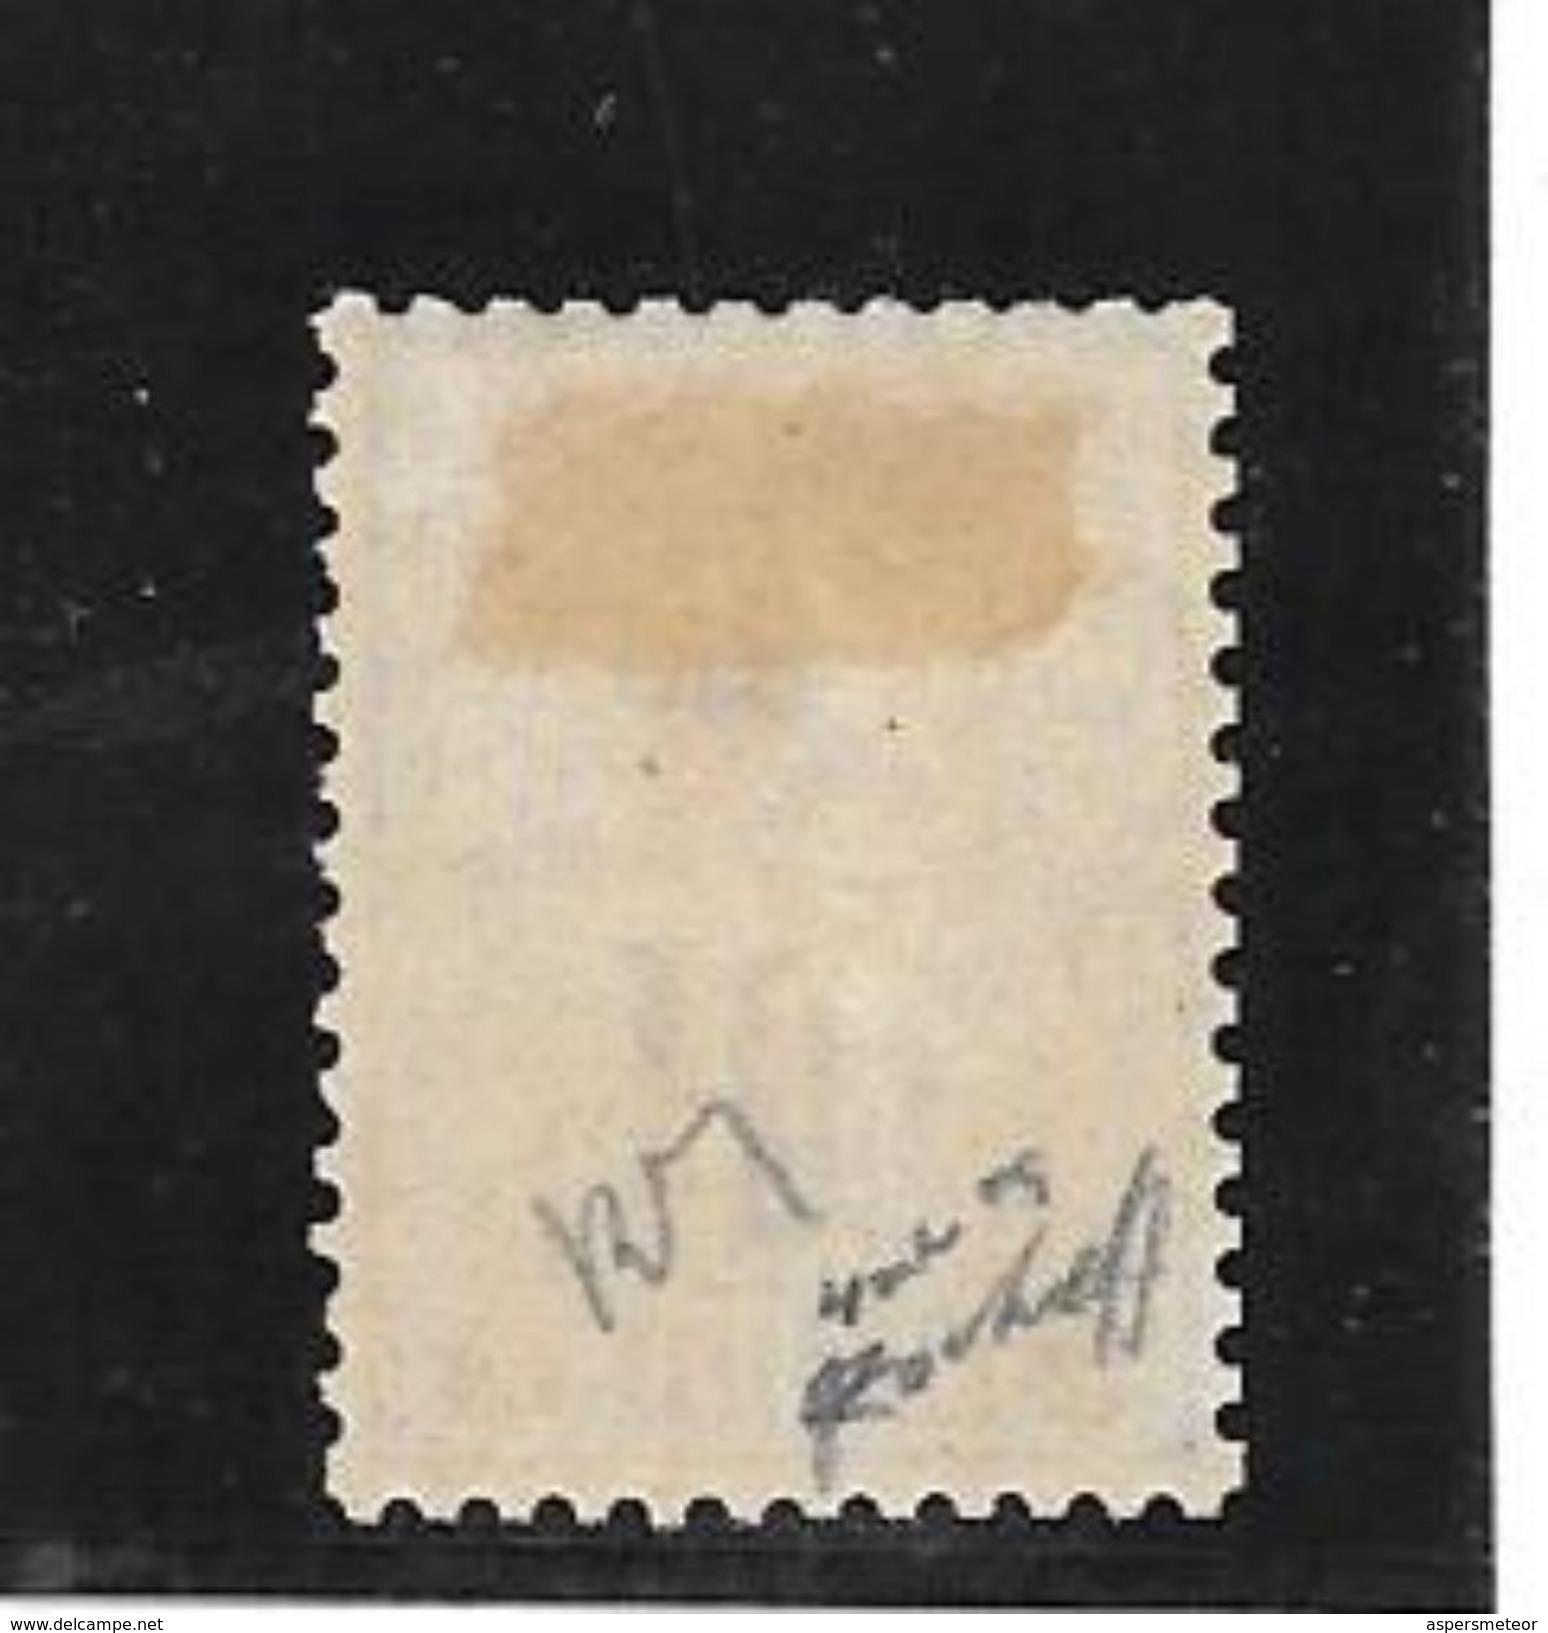 BULGARIE BULGARIA YVERT NR. 47a  RARISIME MH AVEC CHARNIERE SURCHARGE REENVERSE AVEC  2 CERTIFICATIONS D'EXPERTS AU DOS - Used Stamps